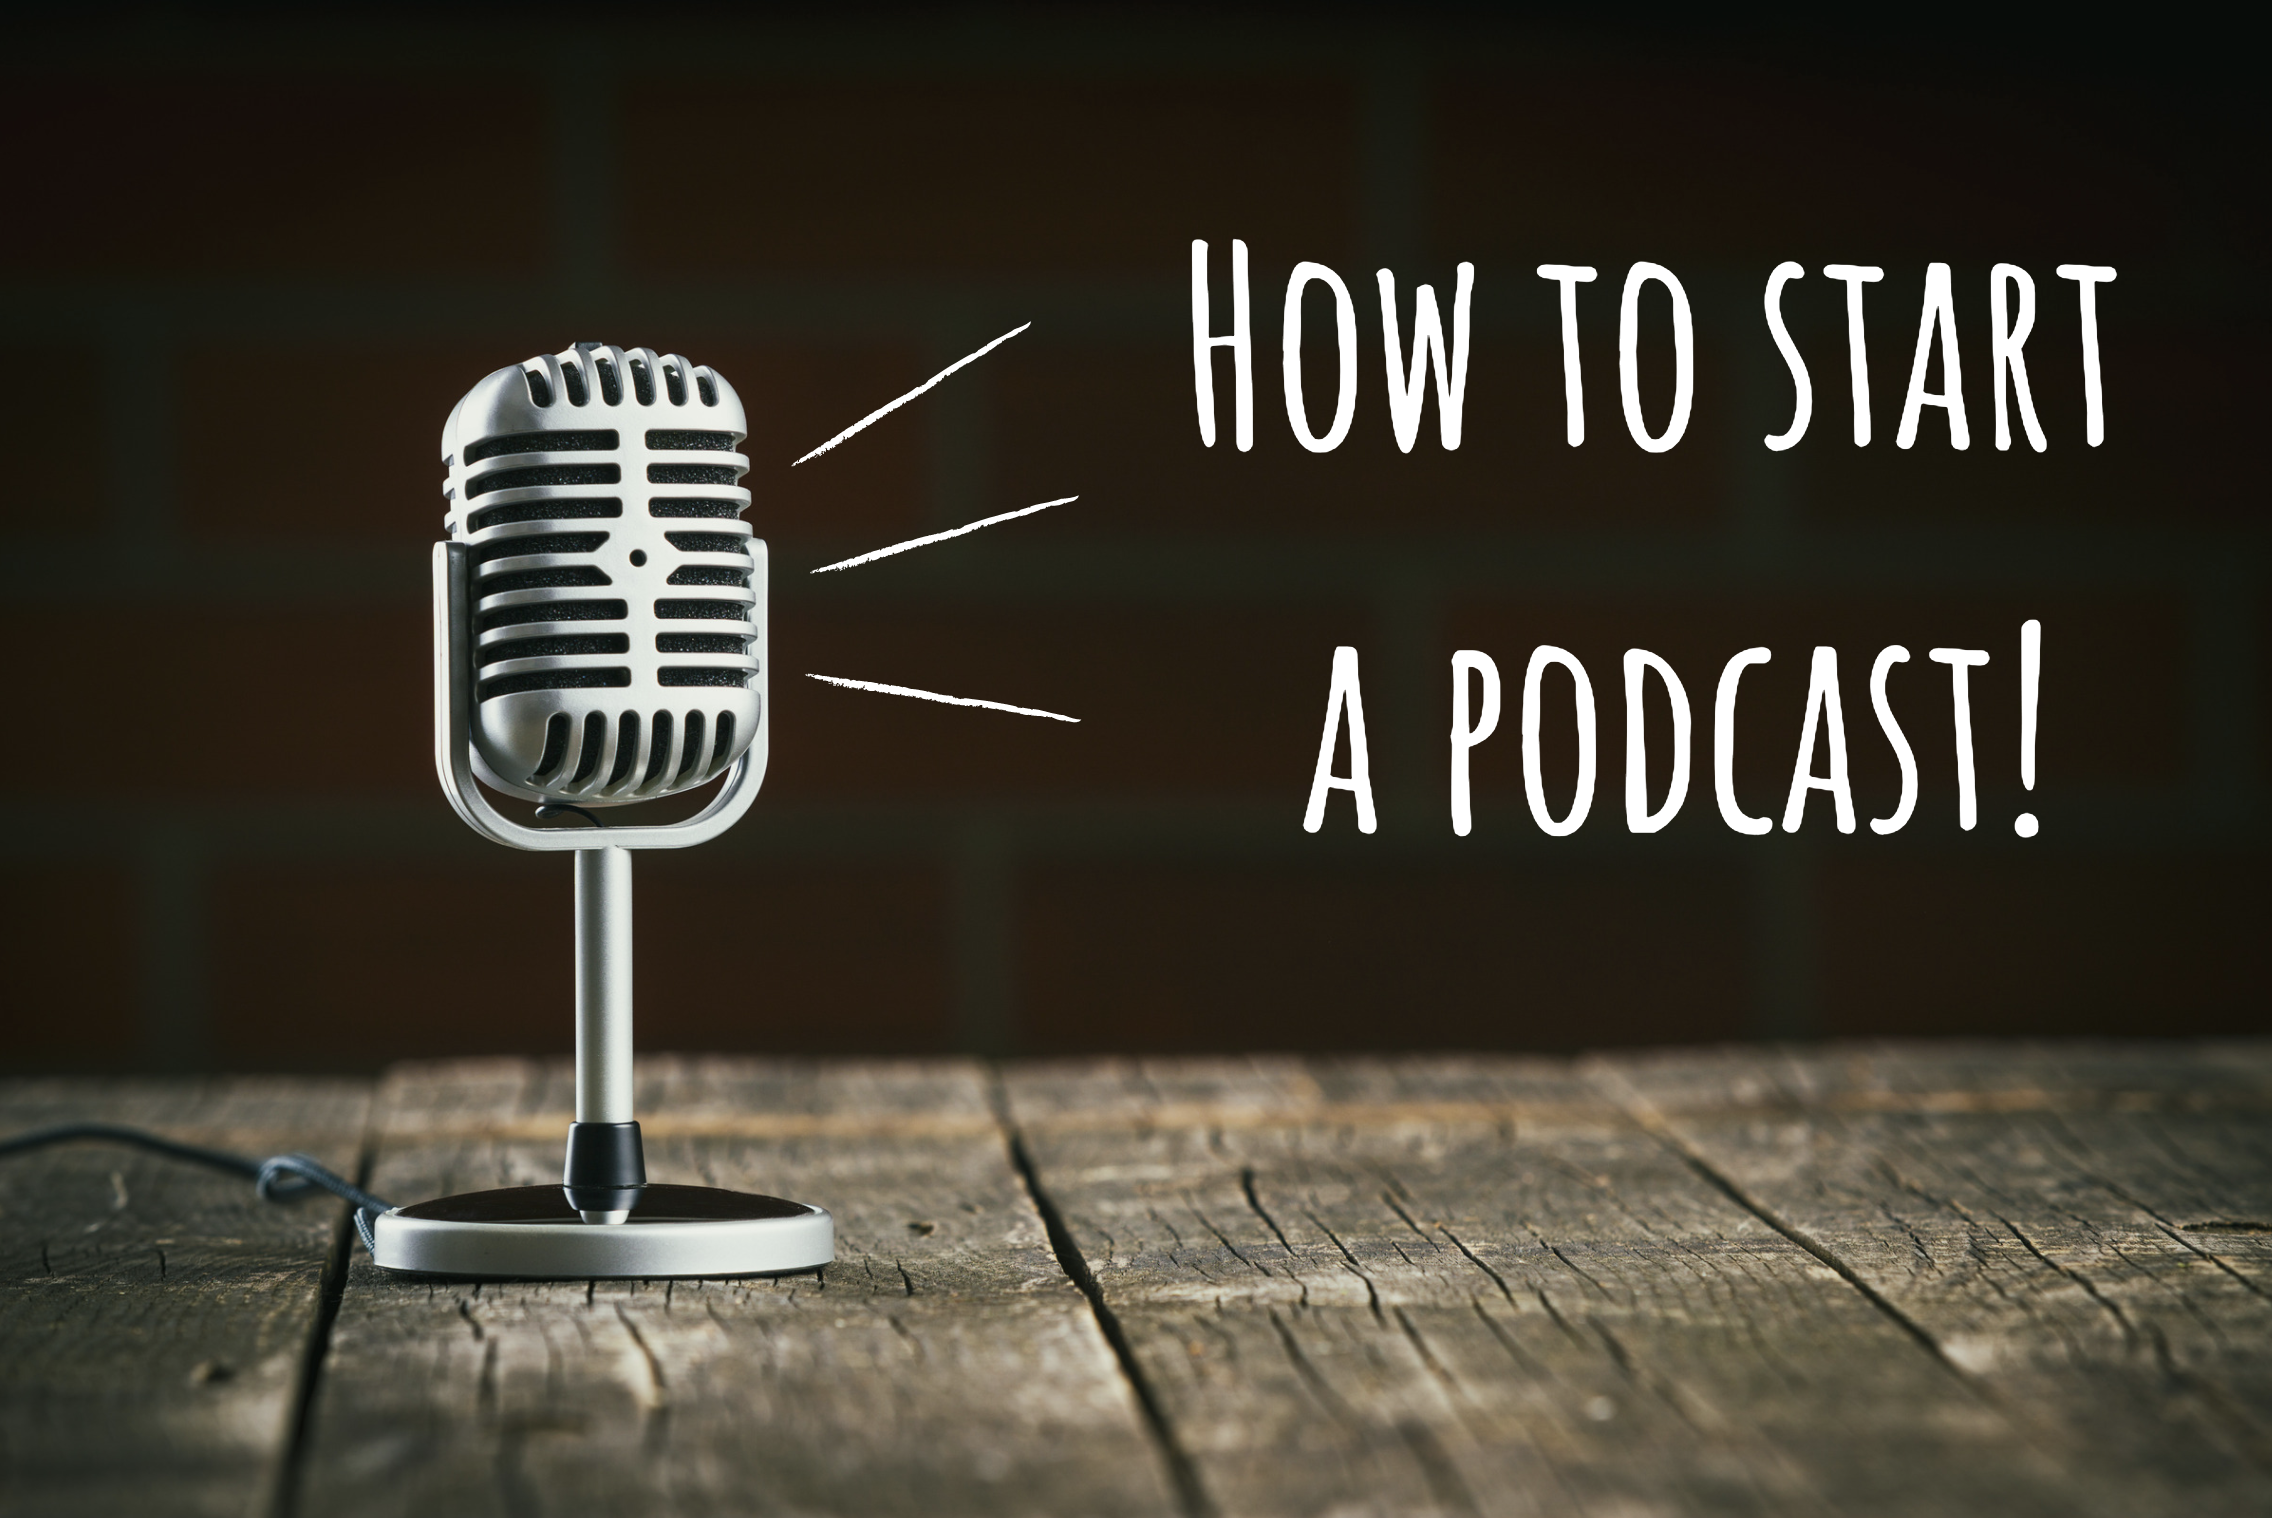 Silver stand up microphone on a wood table with text, "How to start a podcast!"